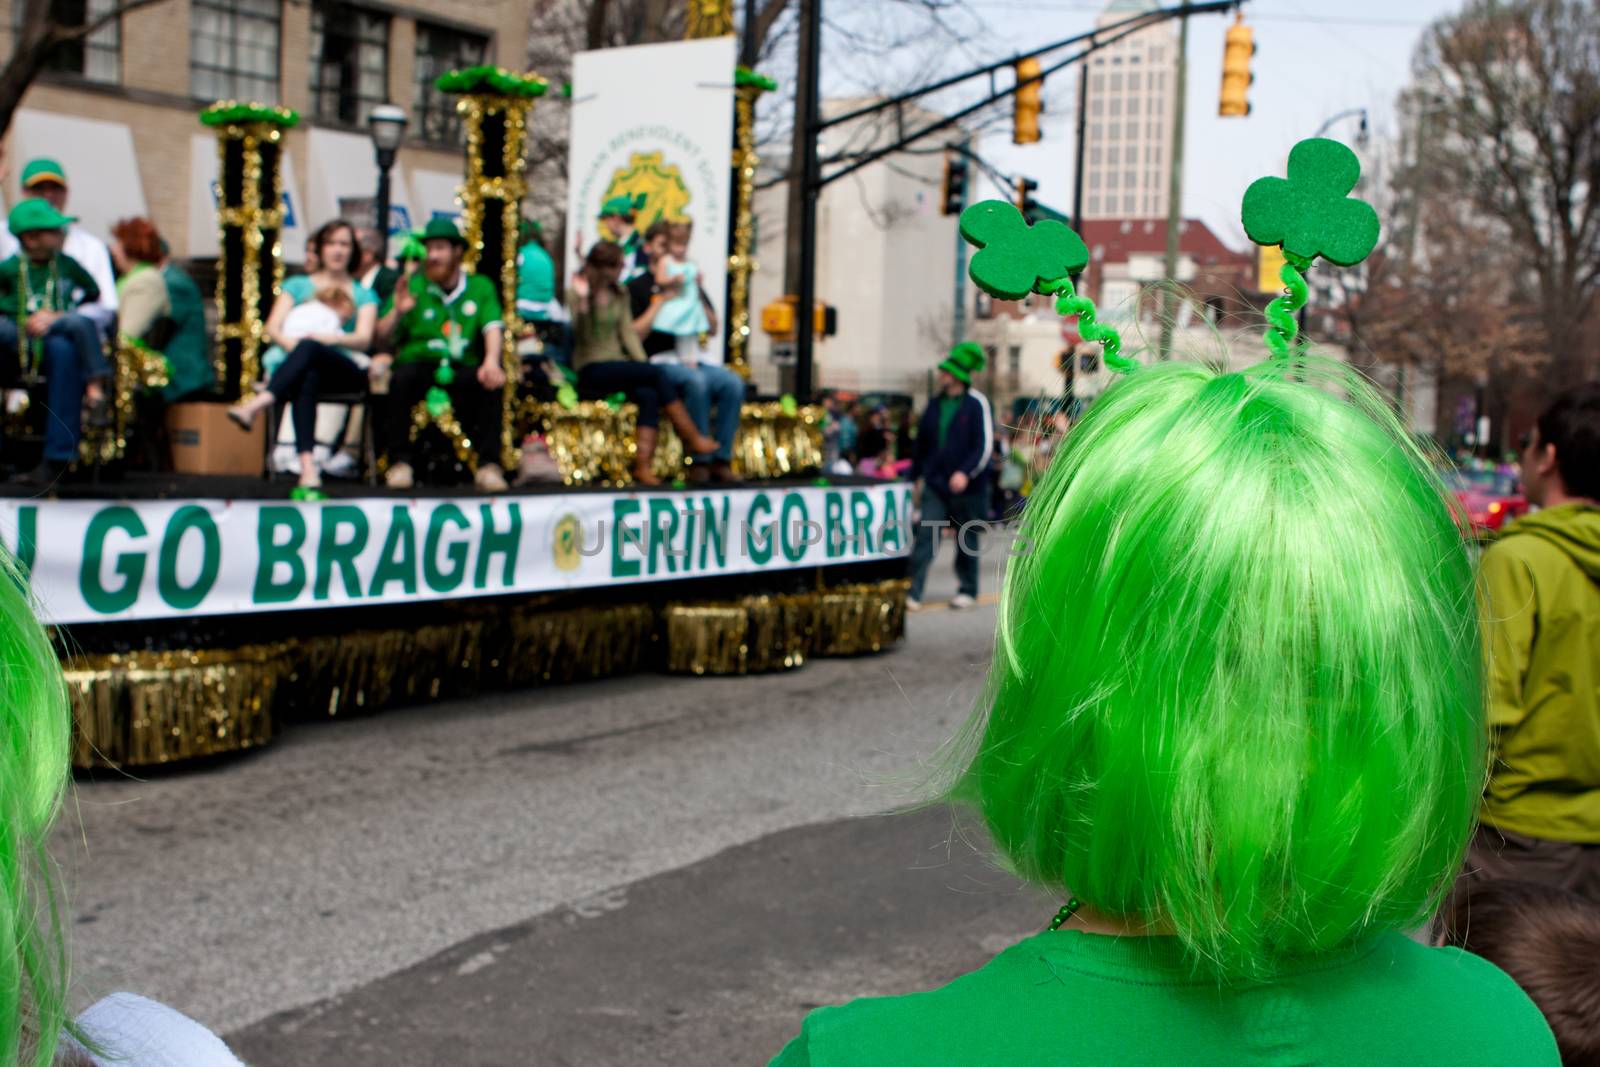 Atlanta, GA - March 15, 2014:  A woman wearing a green wig watches a parade float go by at the annual St. Patrick's parade.